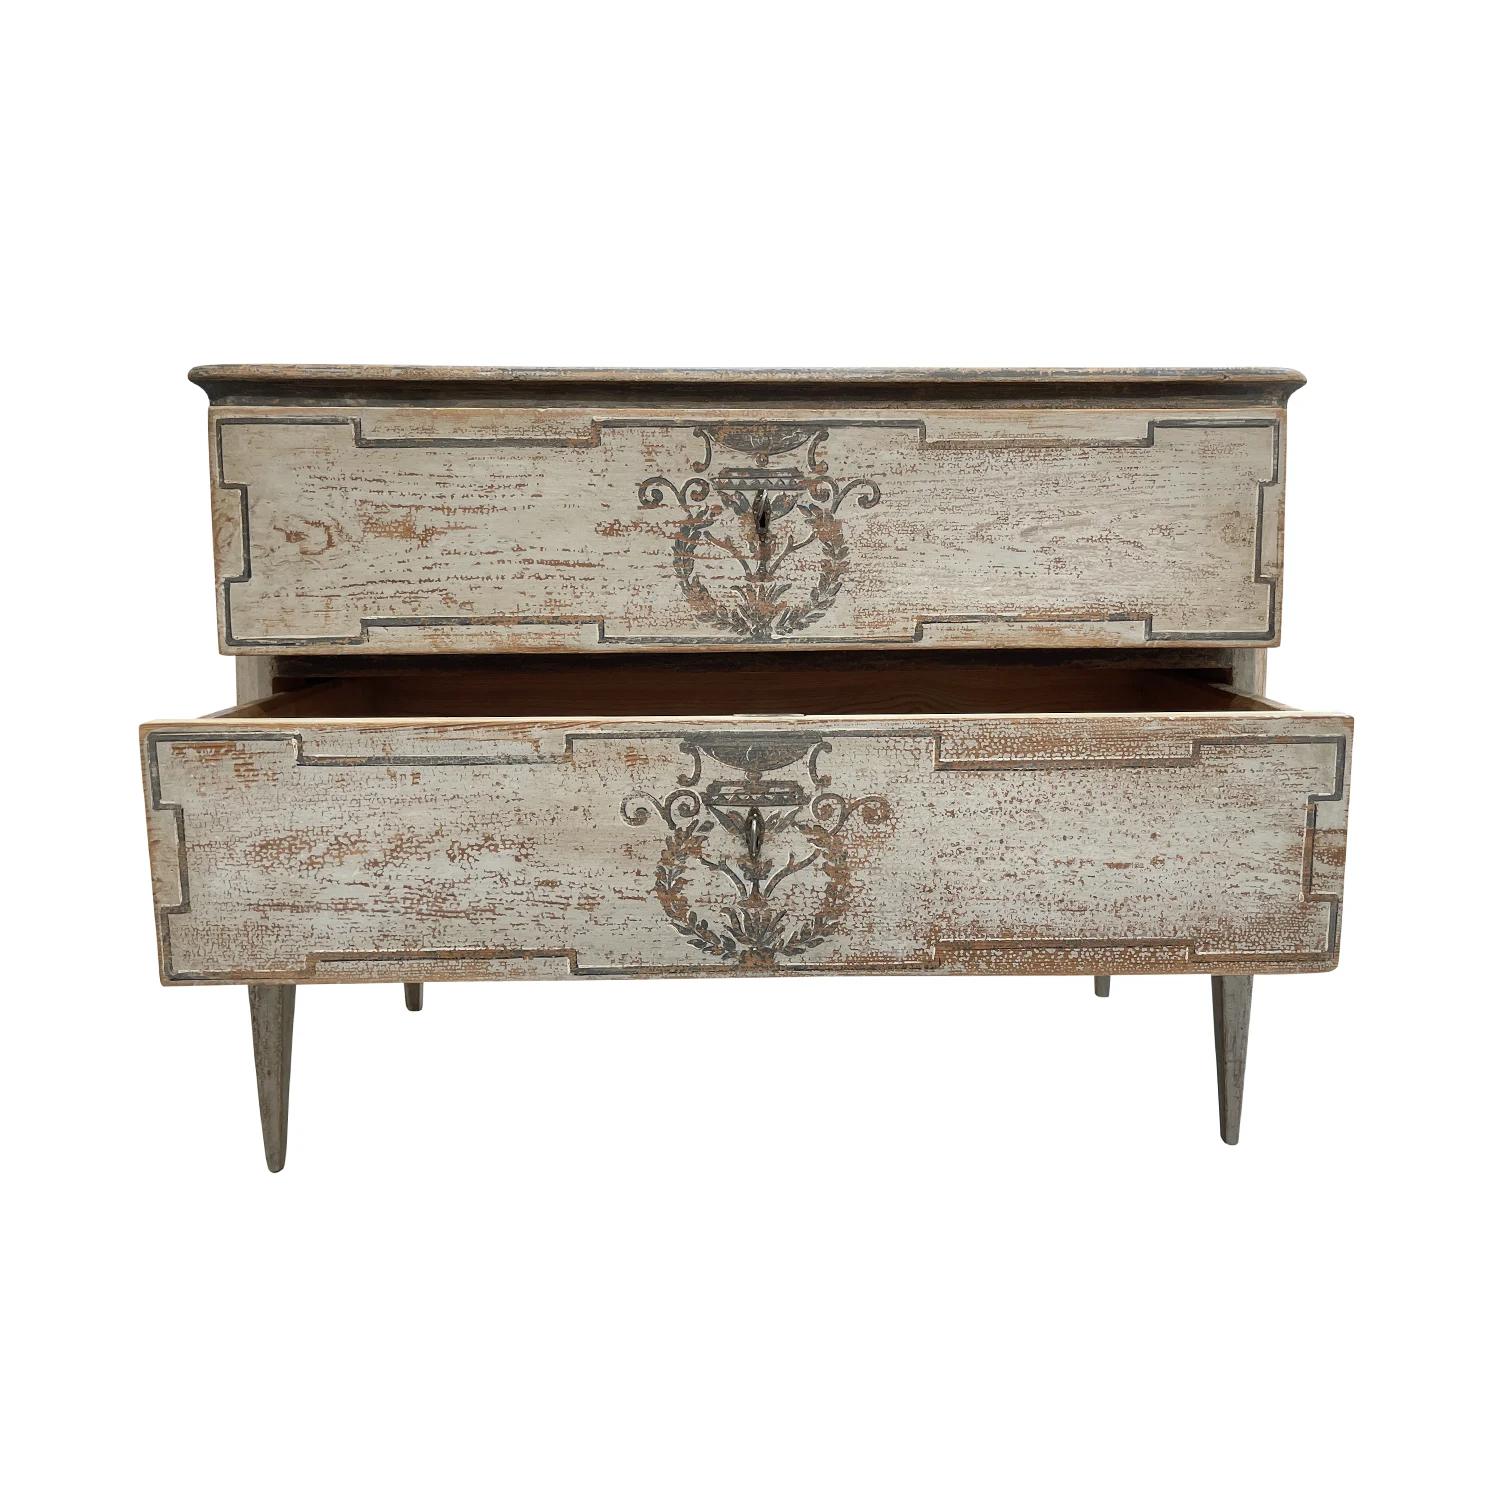 A light-grey, antique German Biedermeier single commode made of hand crafted painted Pinewood, in good condition. The chest is composed with two large drawers, consisting its original hardware and keys. The cabinet is standing on four skinny wooden